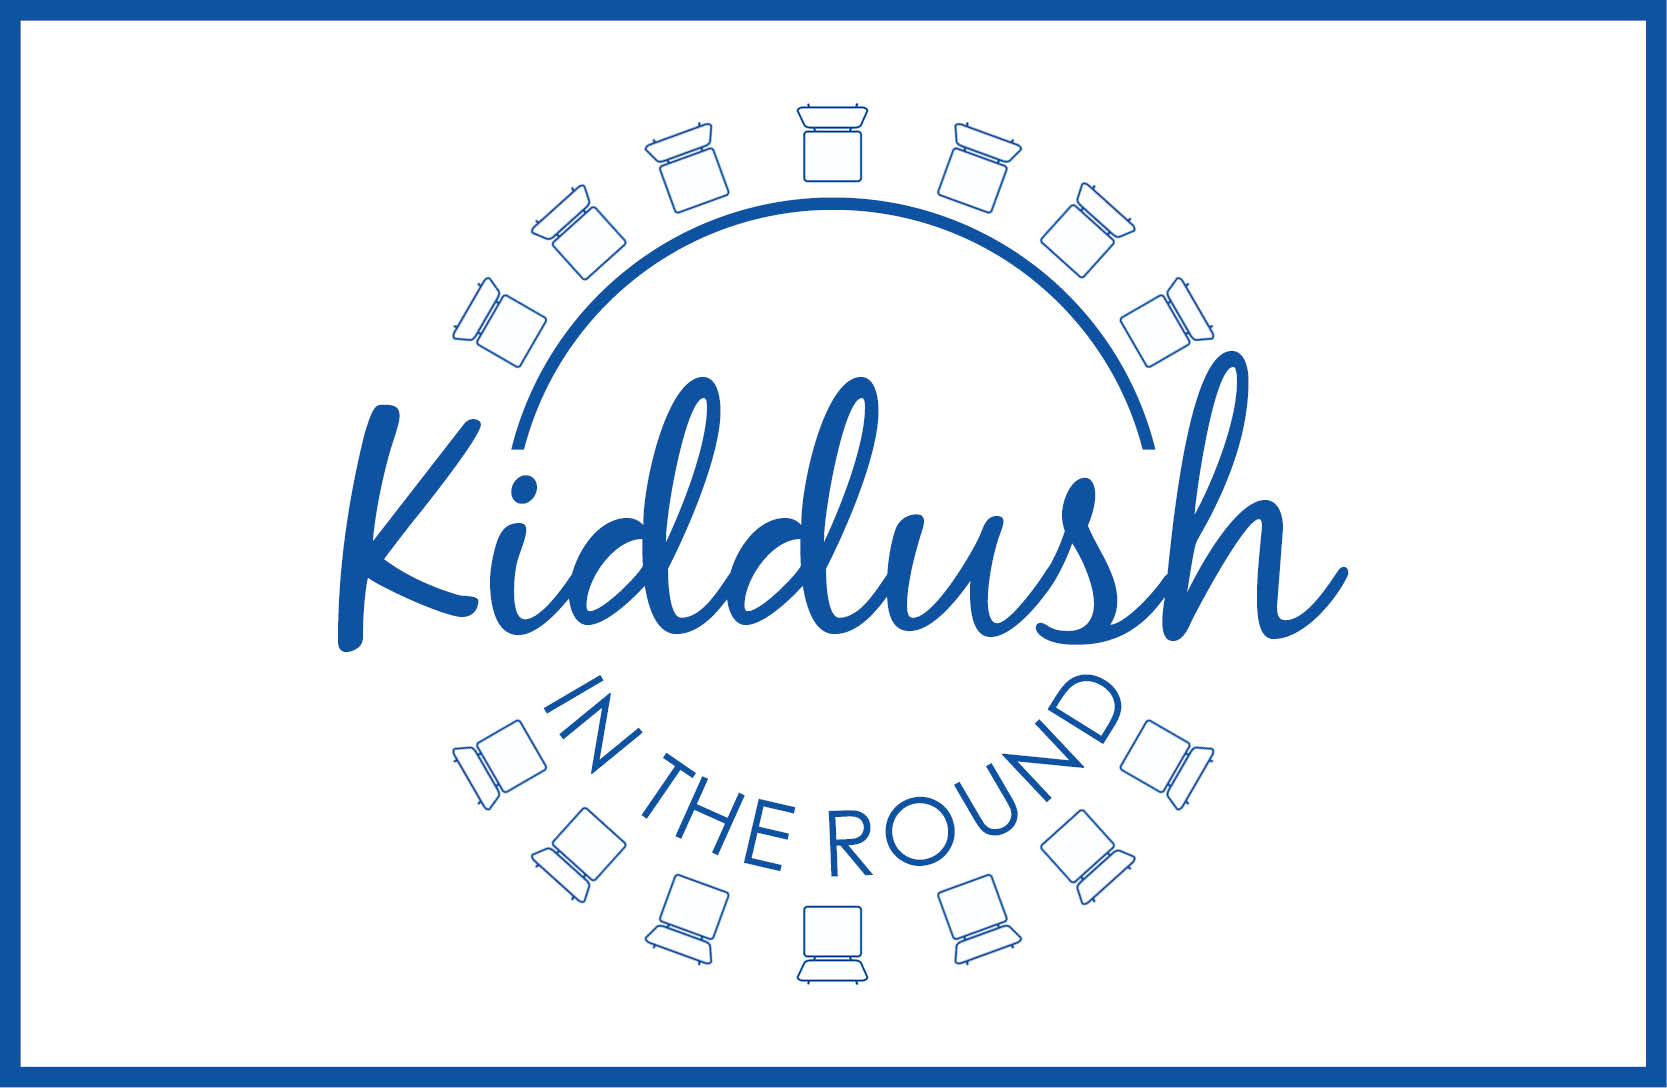 Shabbat with Columbia University and Kiddush in the Round